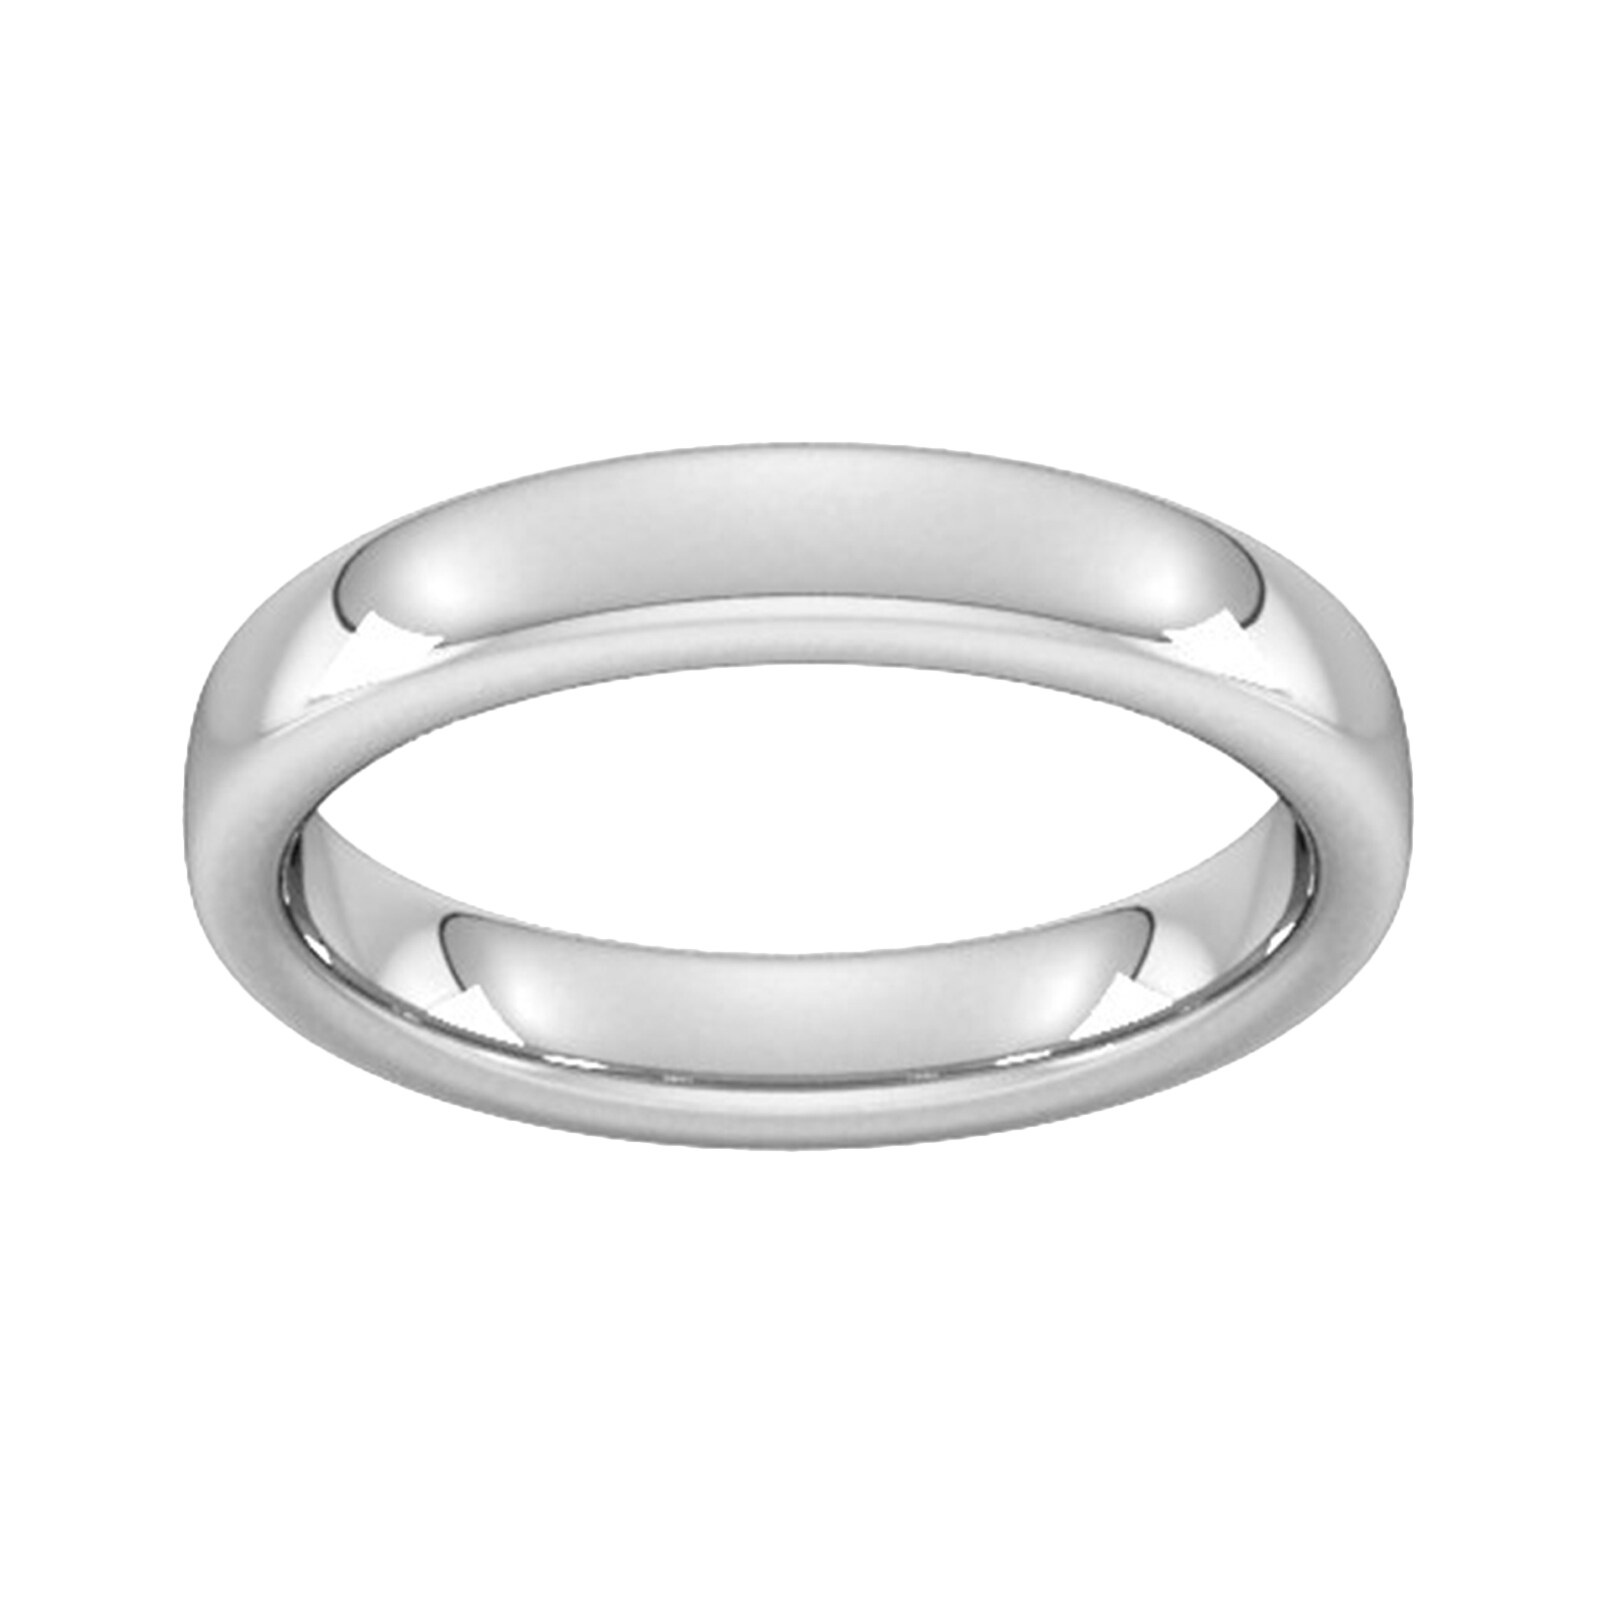 4mm Slight Court Extra Heavy Wedding Ring In Sterling Silver - Ring Size Q